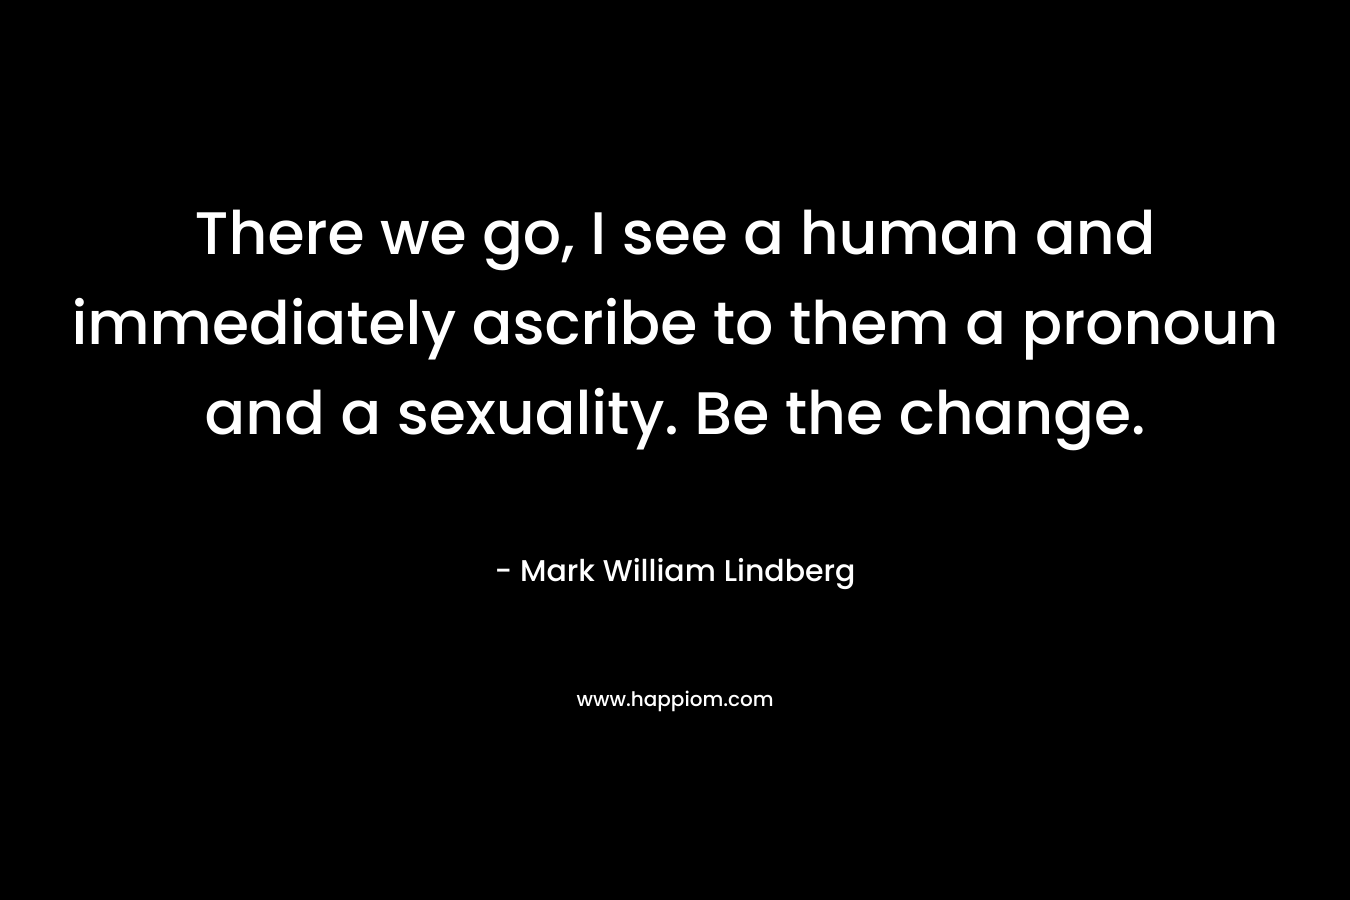 There we go, I see a human and immediately ascribe to them a pronoun and a sexuality. Be the change. – Mark William Lindberg